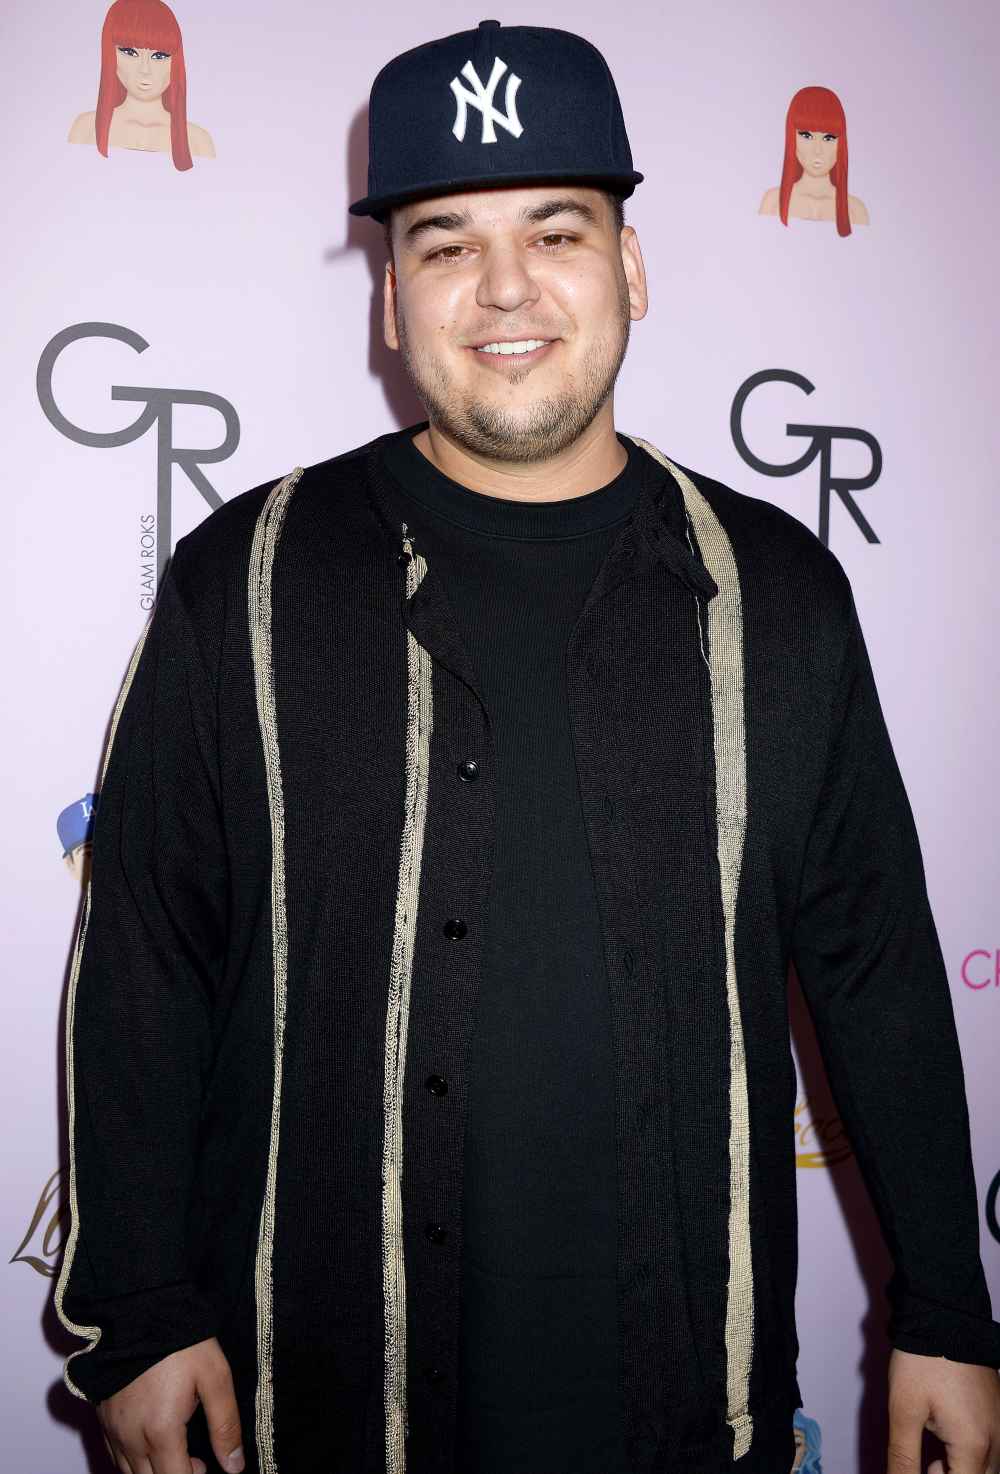 Rob Kardashian Appears to Look Thinner in New Video